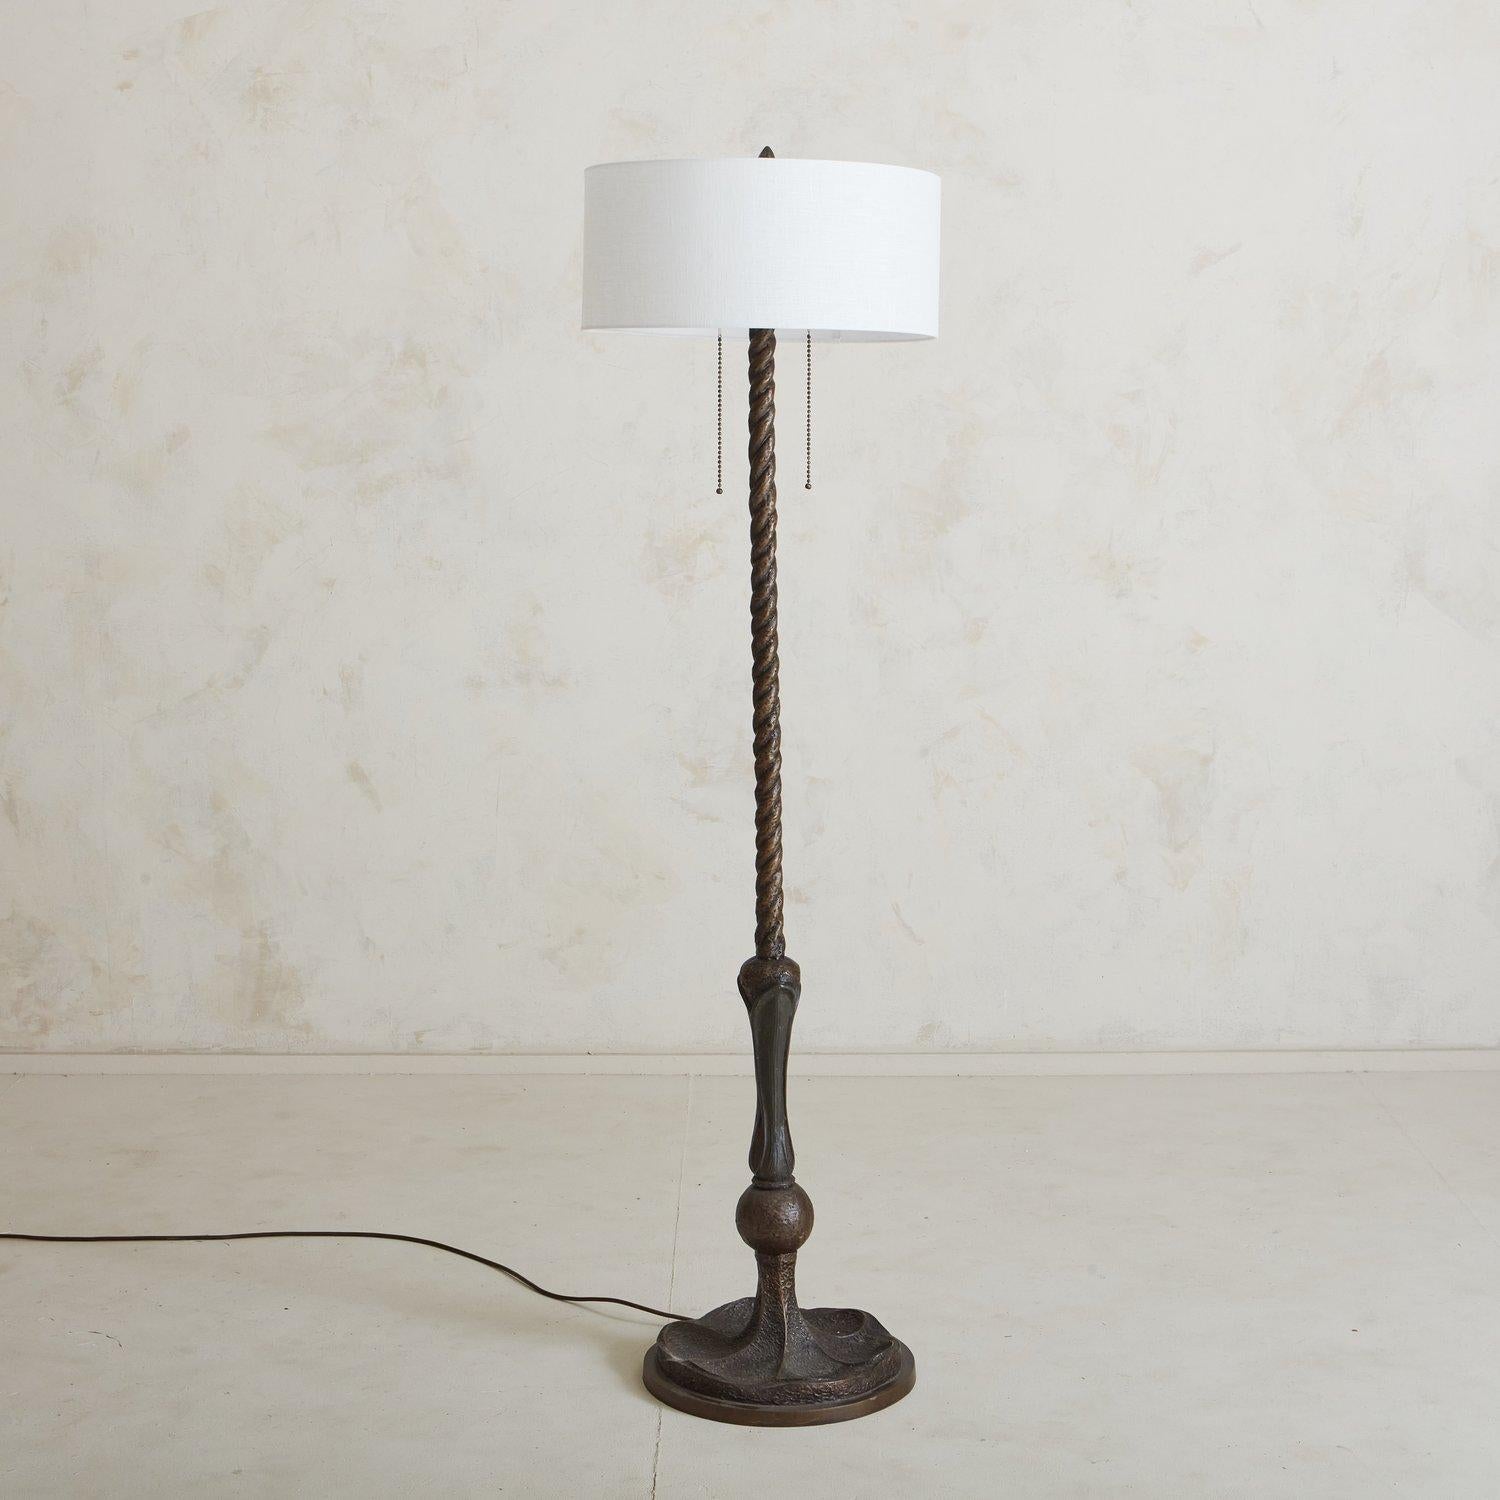 A 1960s bronze floor lamp featuring a circular base, braid motif frame and original, ornate gold tone finial. This piece would be the perfect accent to a favorite corner or reading nook. We love the subtle sculptural details on this beautiful German